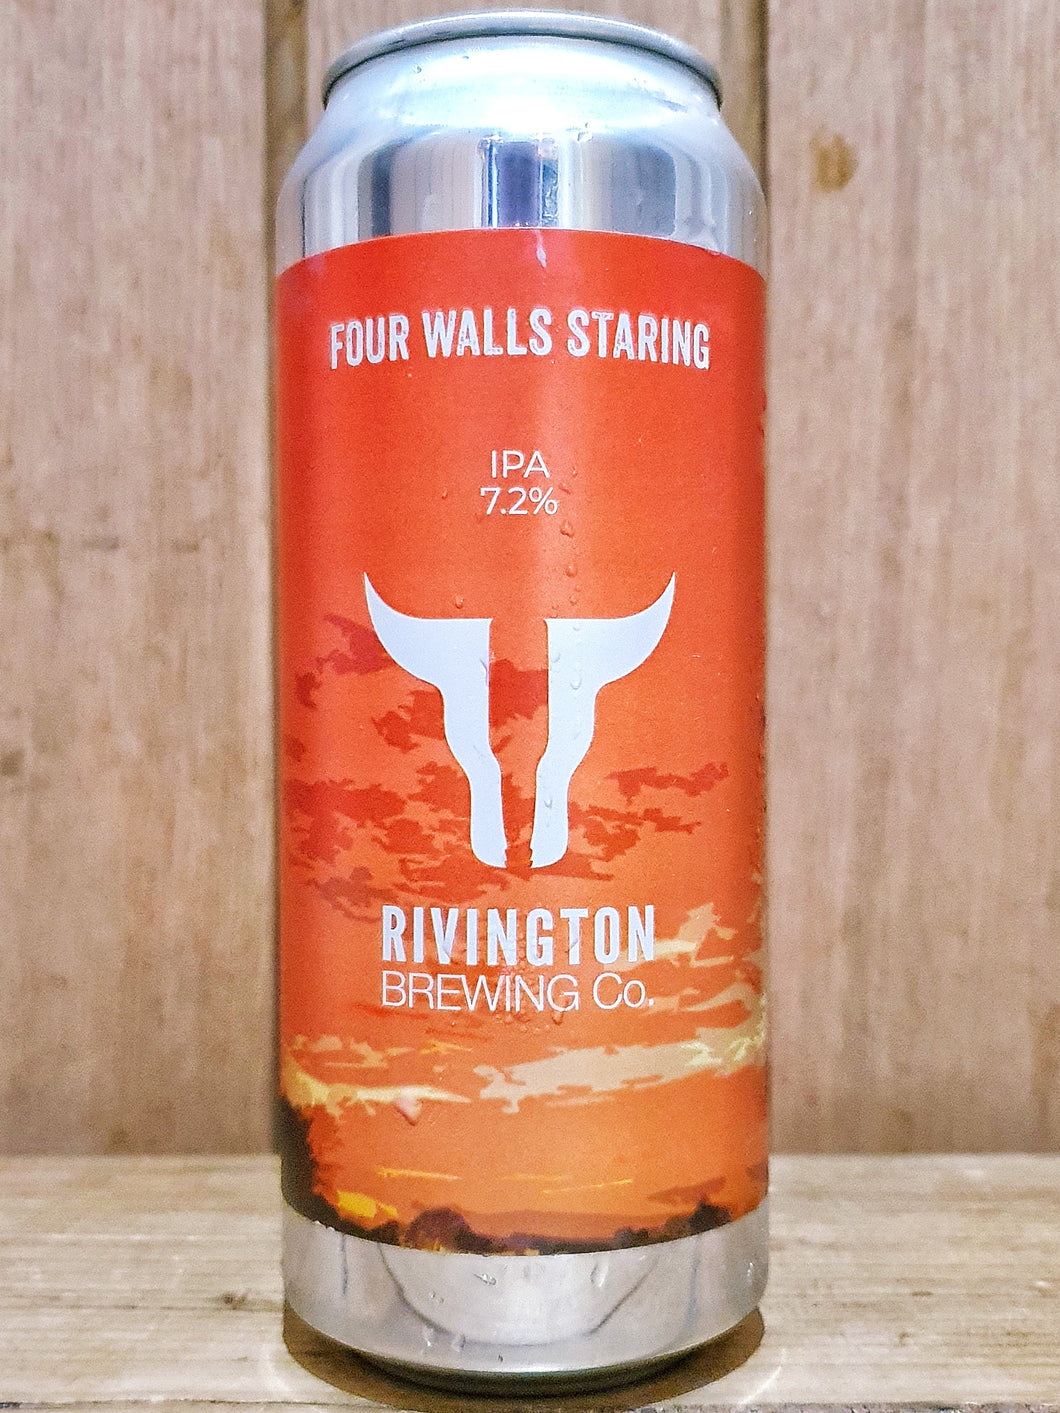 Rivington Brewing Co - Four Walls Staring